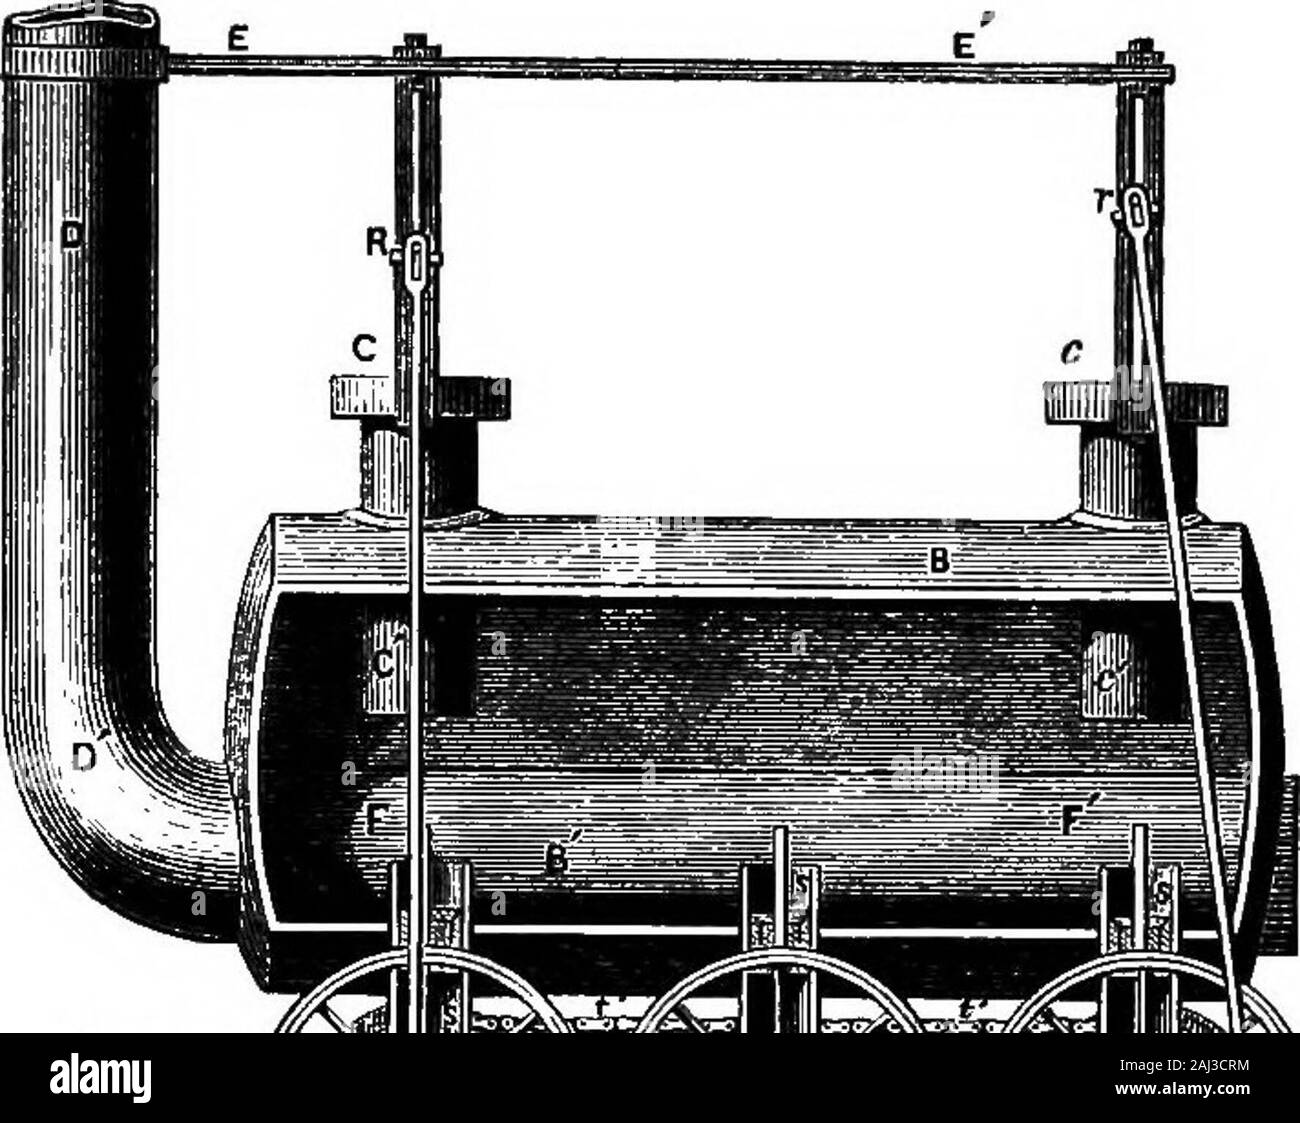 A history of the growth of the steam-engine . cal, 8 inches in diame-ter and of 2 feet stroke of piston, set in the boiler, anddriving a set of wheels which geared with each other andwith other cogged wheels on the two driving-axles. A feed-water heater surrounded the base of the chimney. Thisengine drew 30 tons on a rising gradient of 10 or 12 feet tothe mile at the rate of 4 miles an hour. This engine provedin many respects defective, and the cost of its operationwas found to be about as great as that of employing horse-power. Stephenson determined to build another engine on asomewhat differ Stock Photo